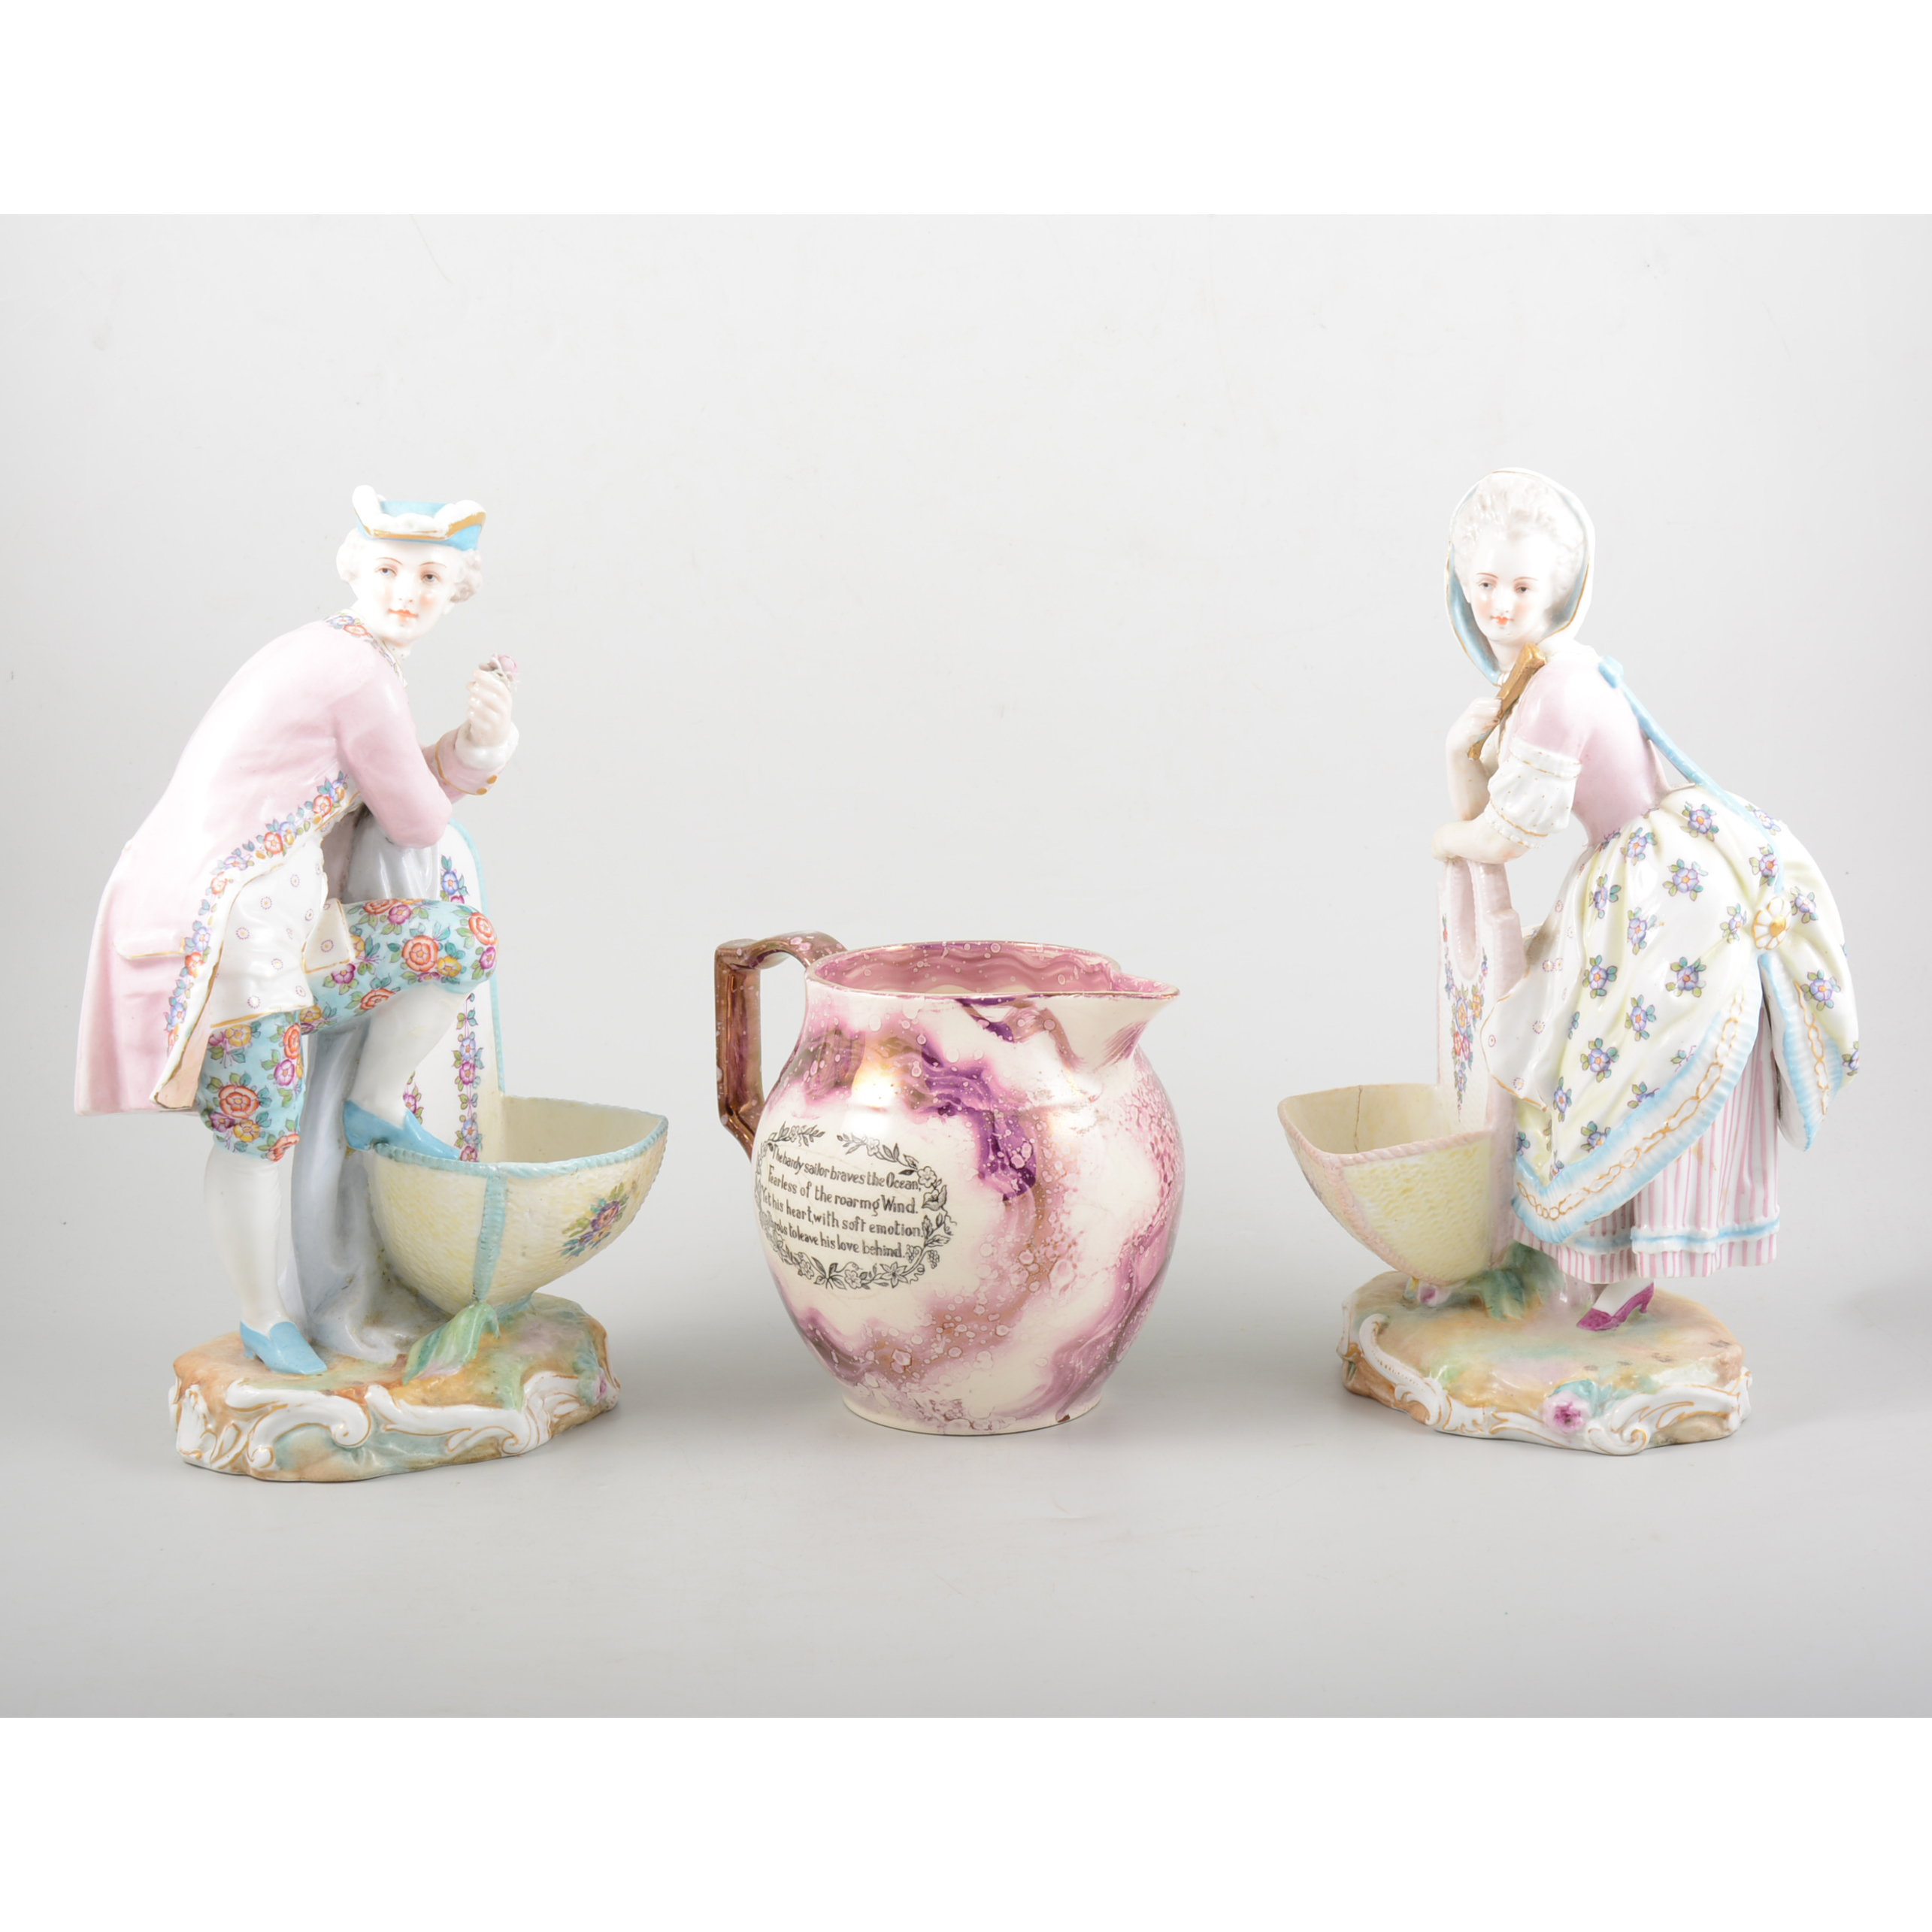 Pair of Meissen style porcelain figures, modelled as a Lady and Gentleman in 18th Century costume,